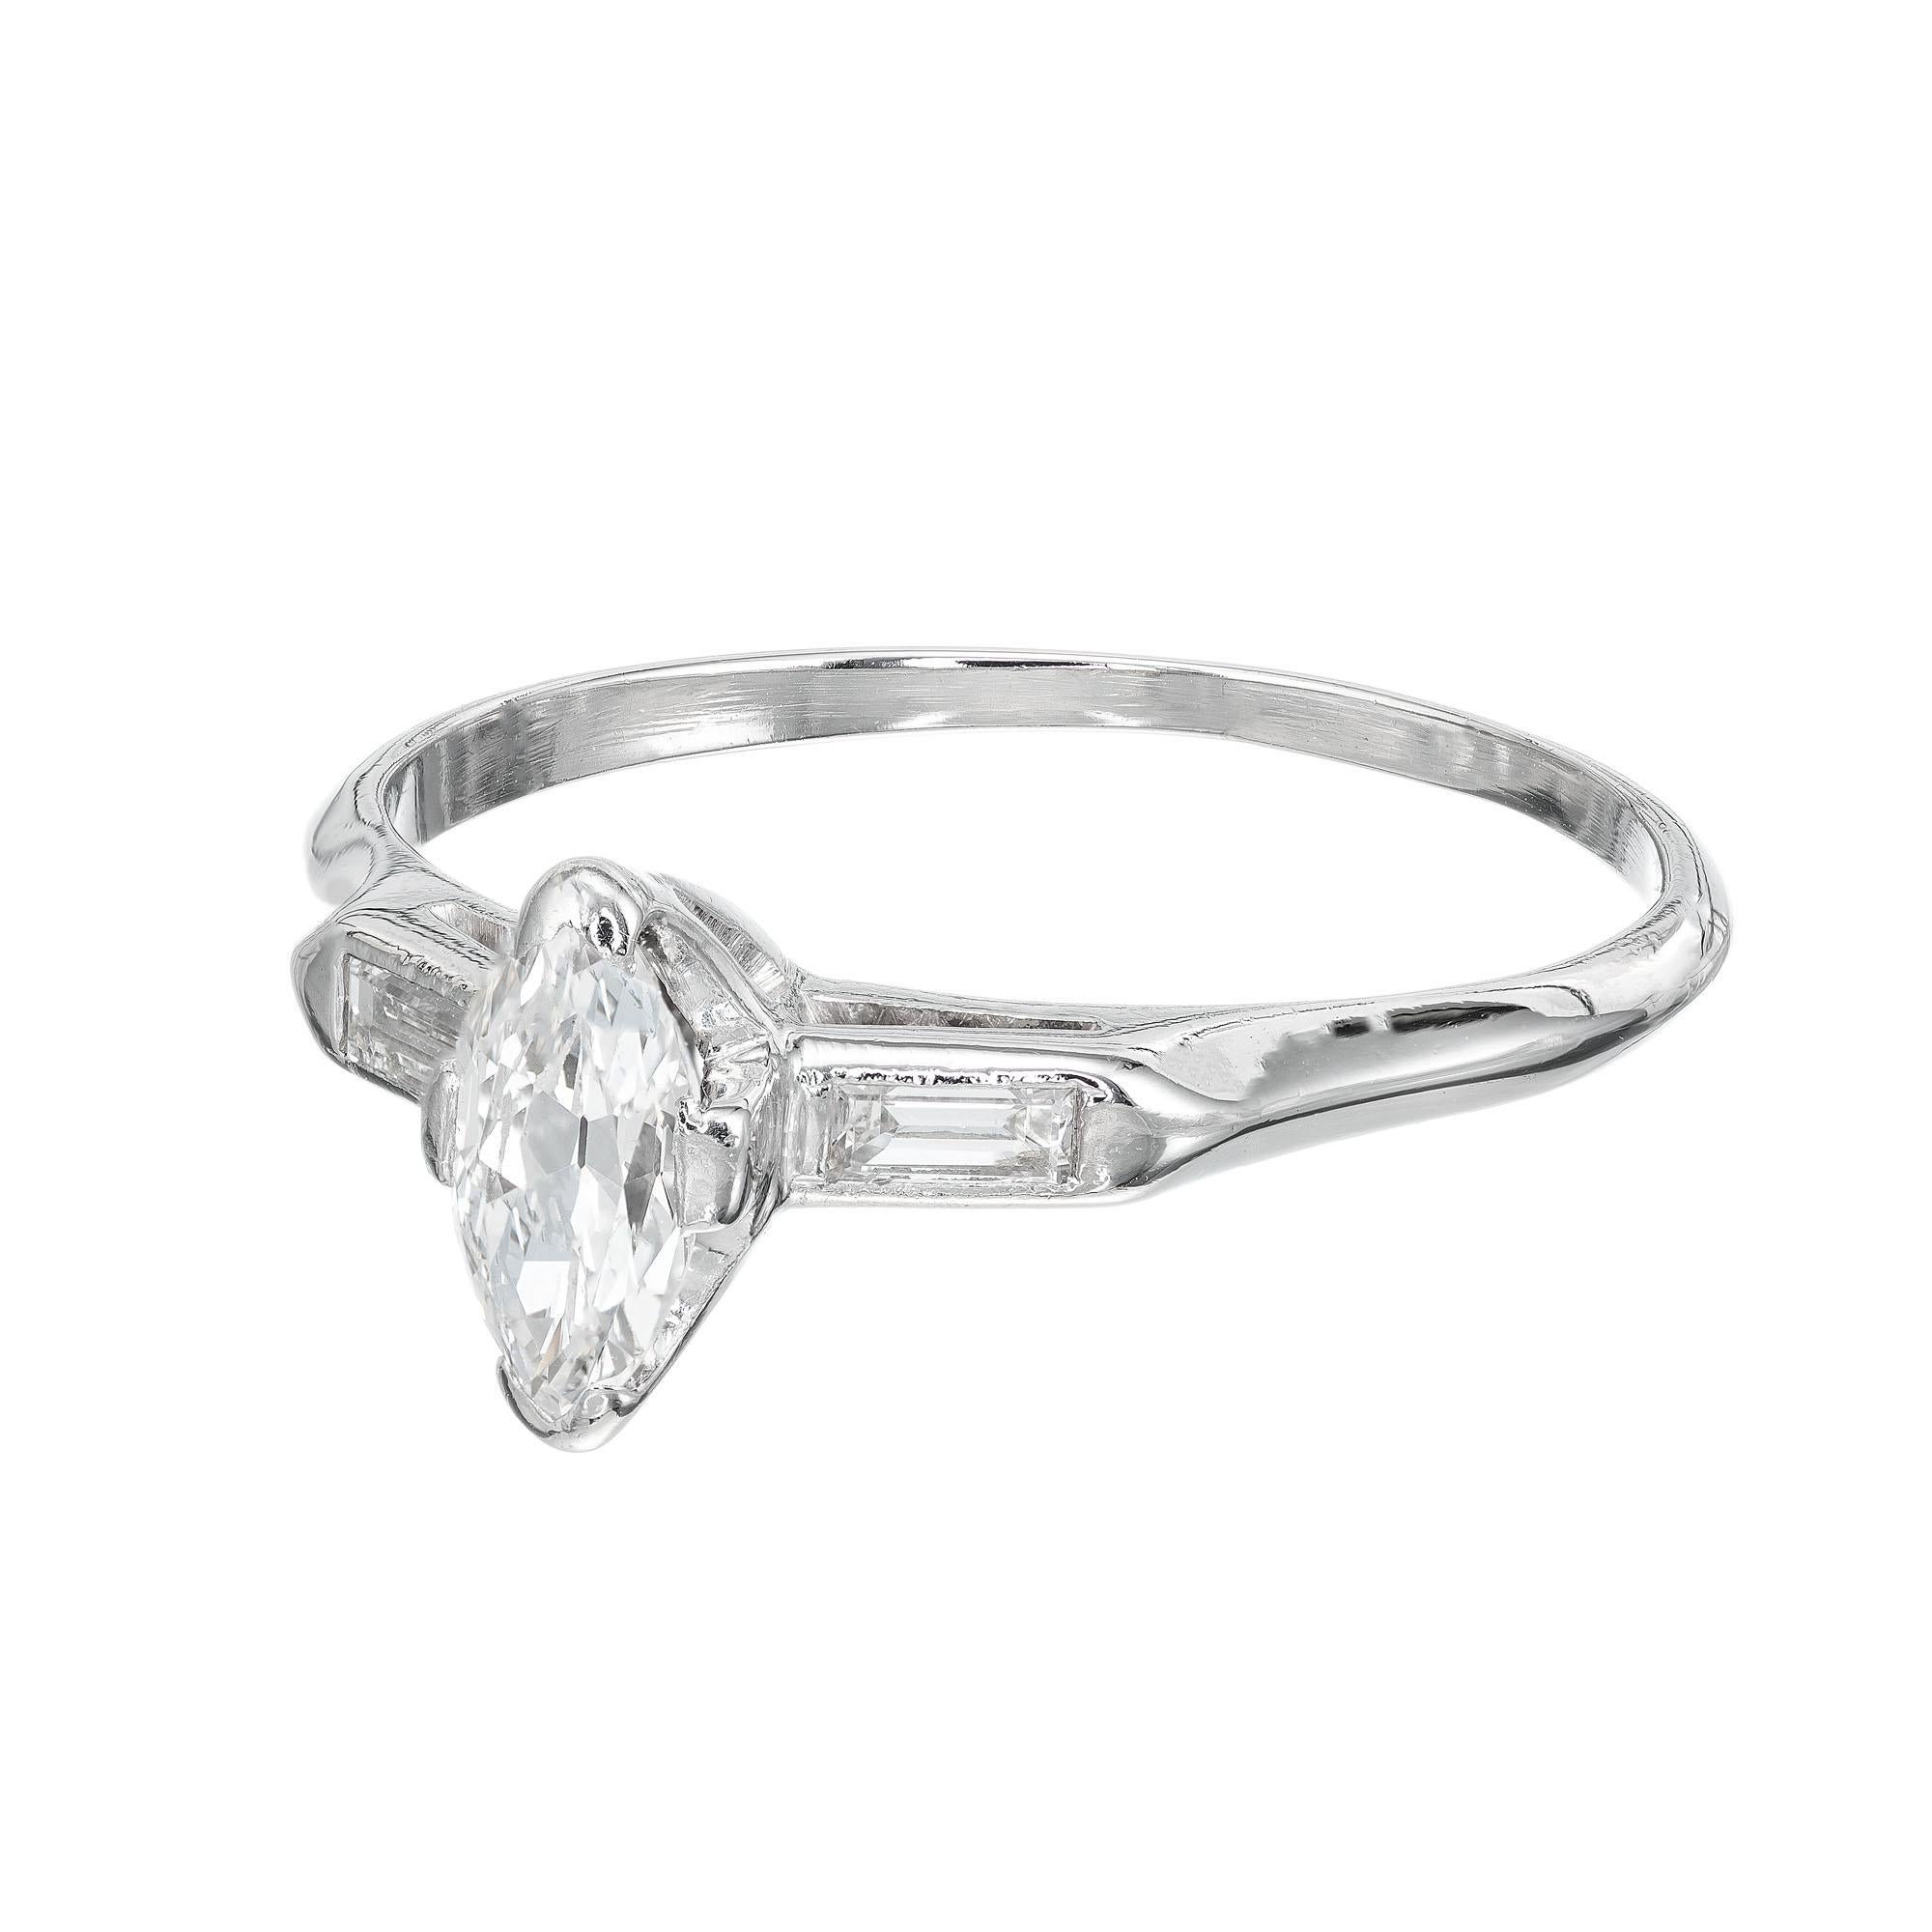 1950's Marquise diamond engagement ring. Marquise center stone set in platinum with two baguette side diamonds. EGL certified# US64833201D

1 Marquise diamond, approx. total weight .45ct, F, SI1, Depth: 59% Table: 62%. 
2 straight baguette cut